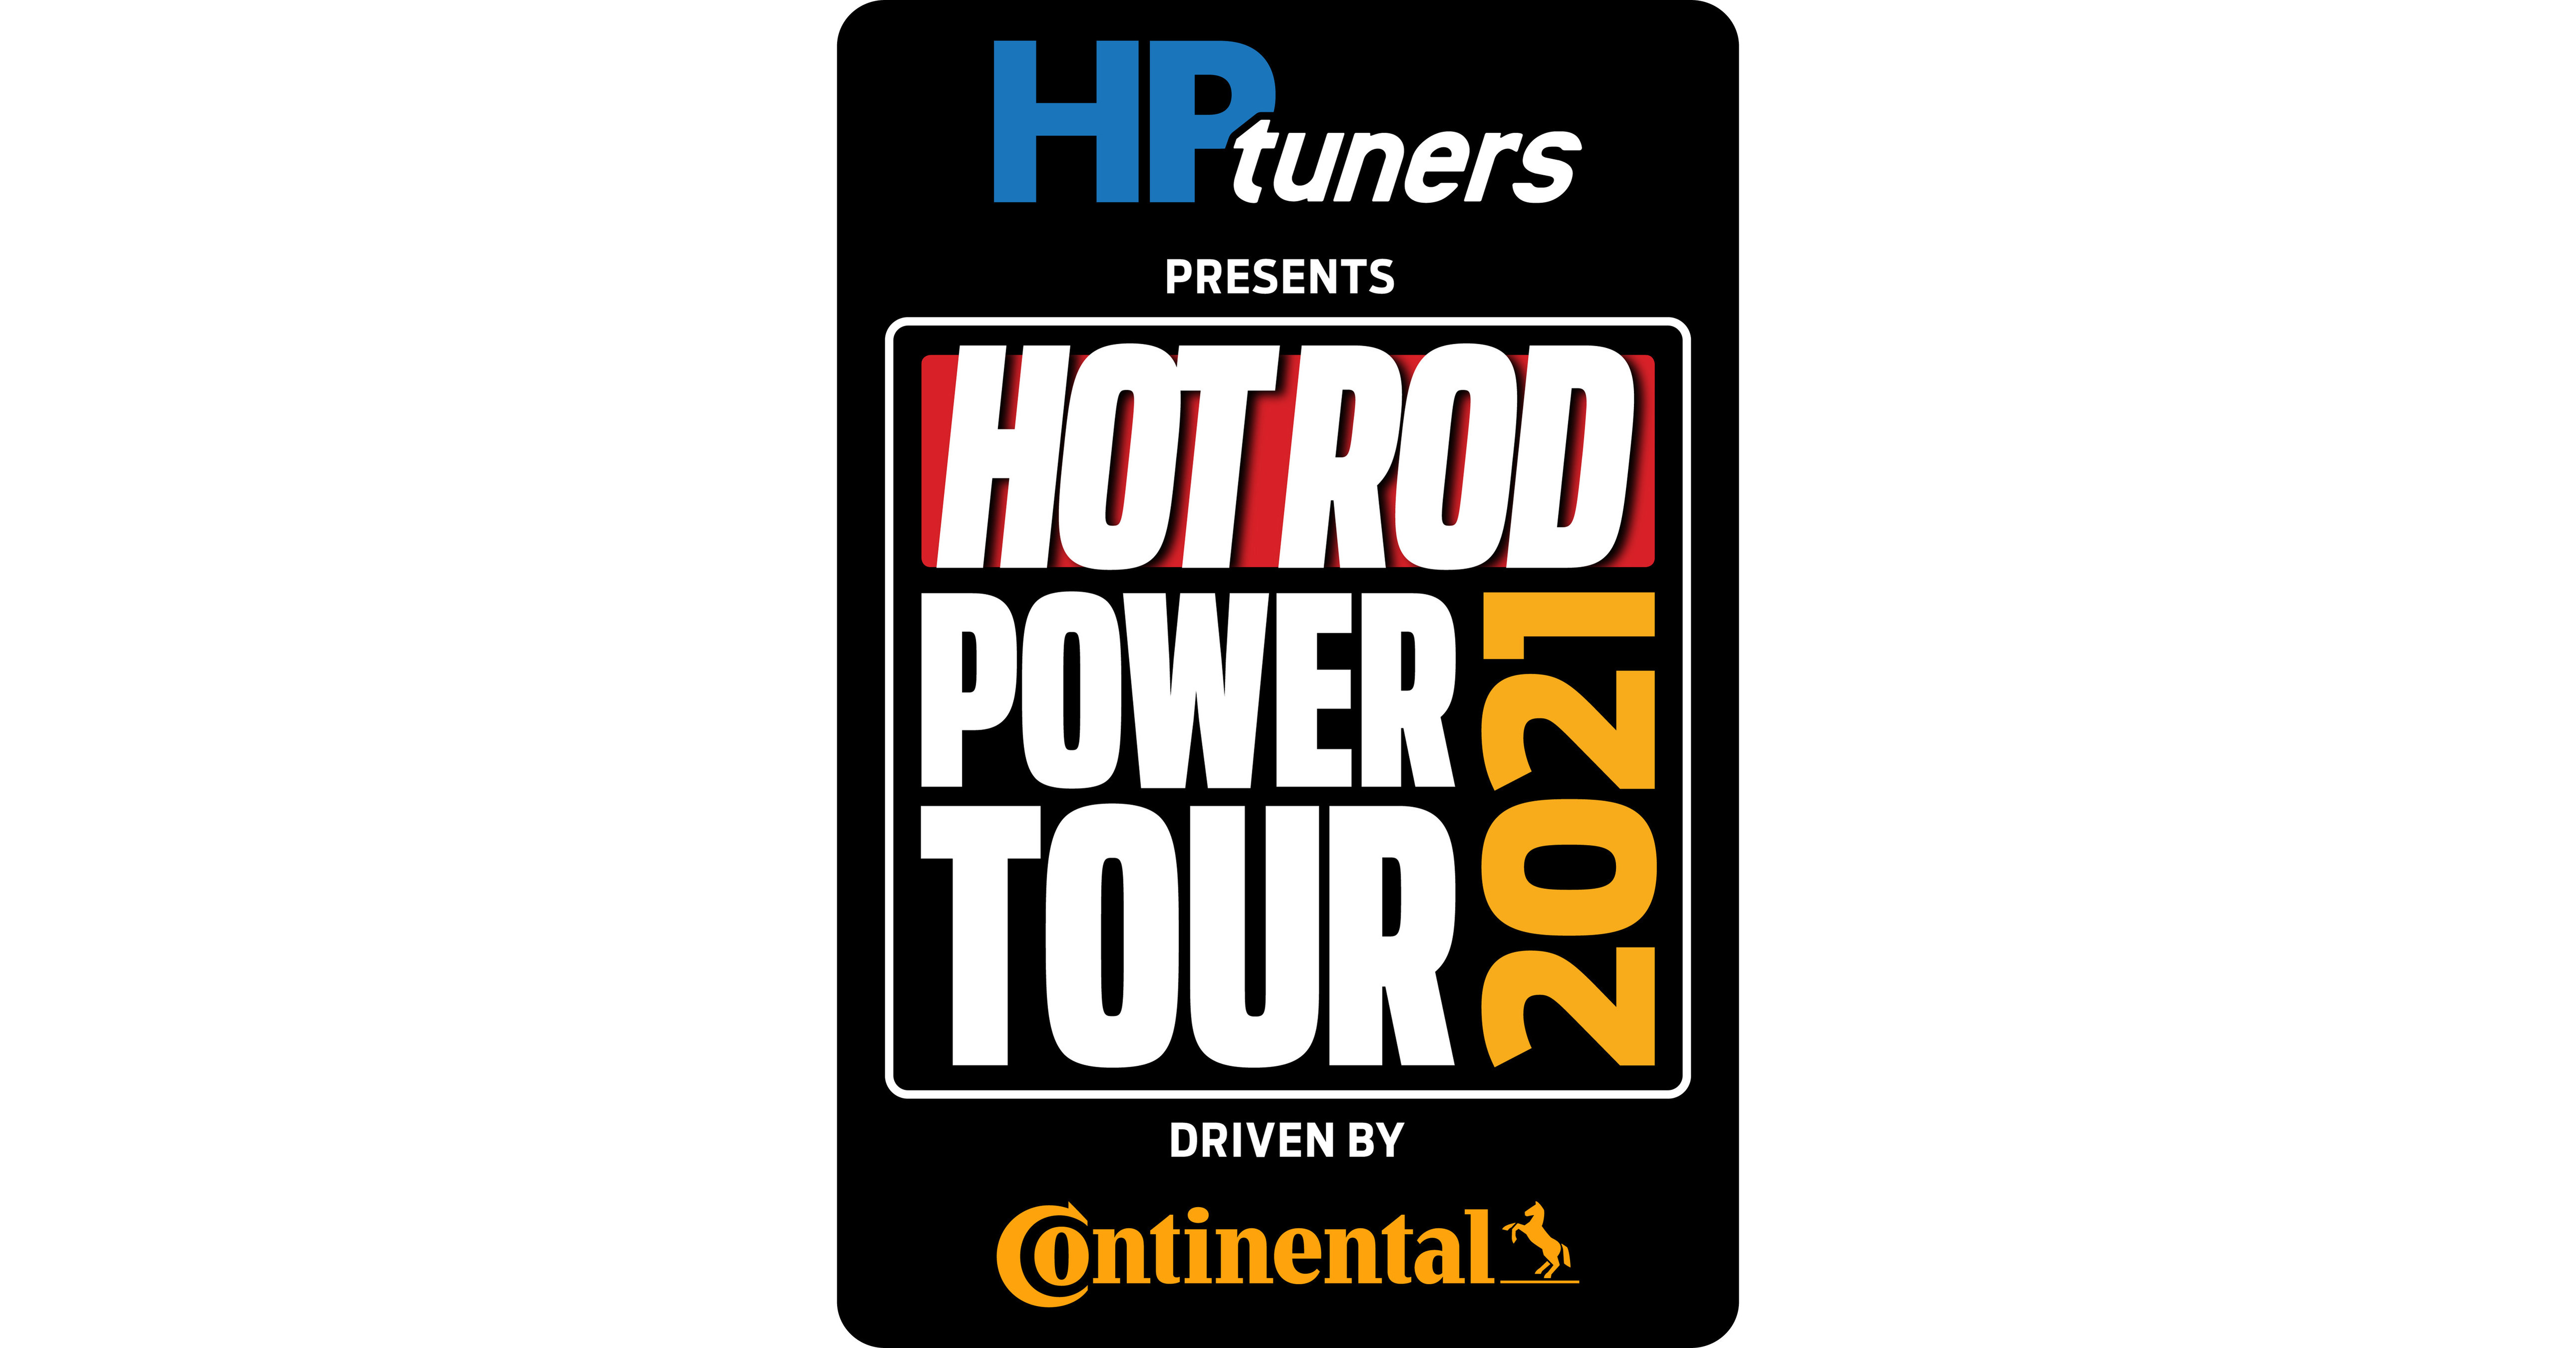 MOTORTREND'S legendary annual HOT ROD POWER TOUR rolls through the